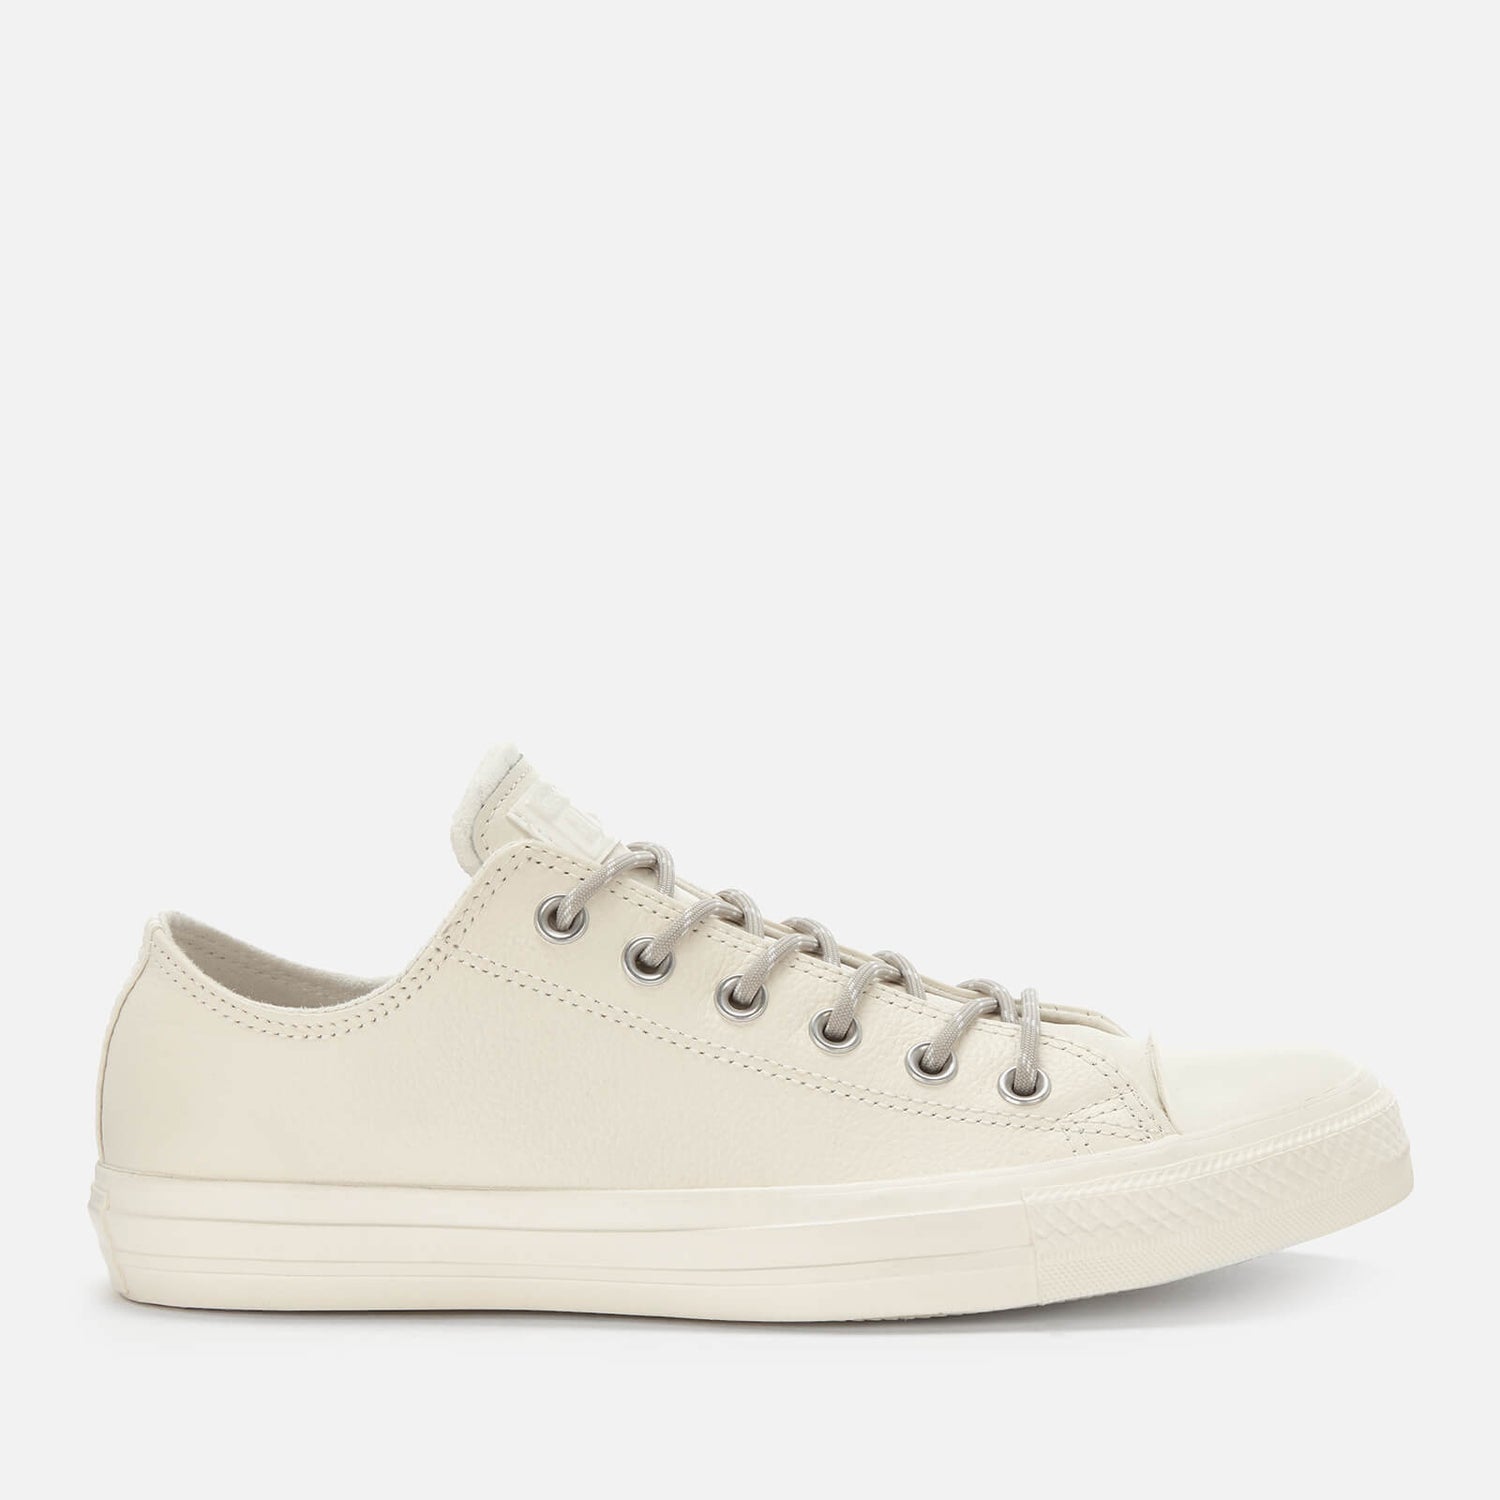 Converse Men's Chuck Taylor All Star Ox Trainers - Egret/Papyrus | FREE ...